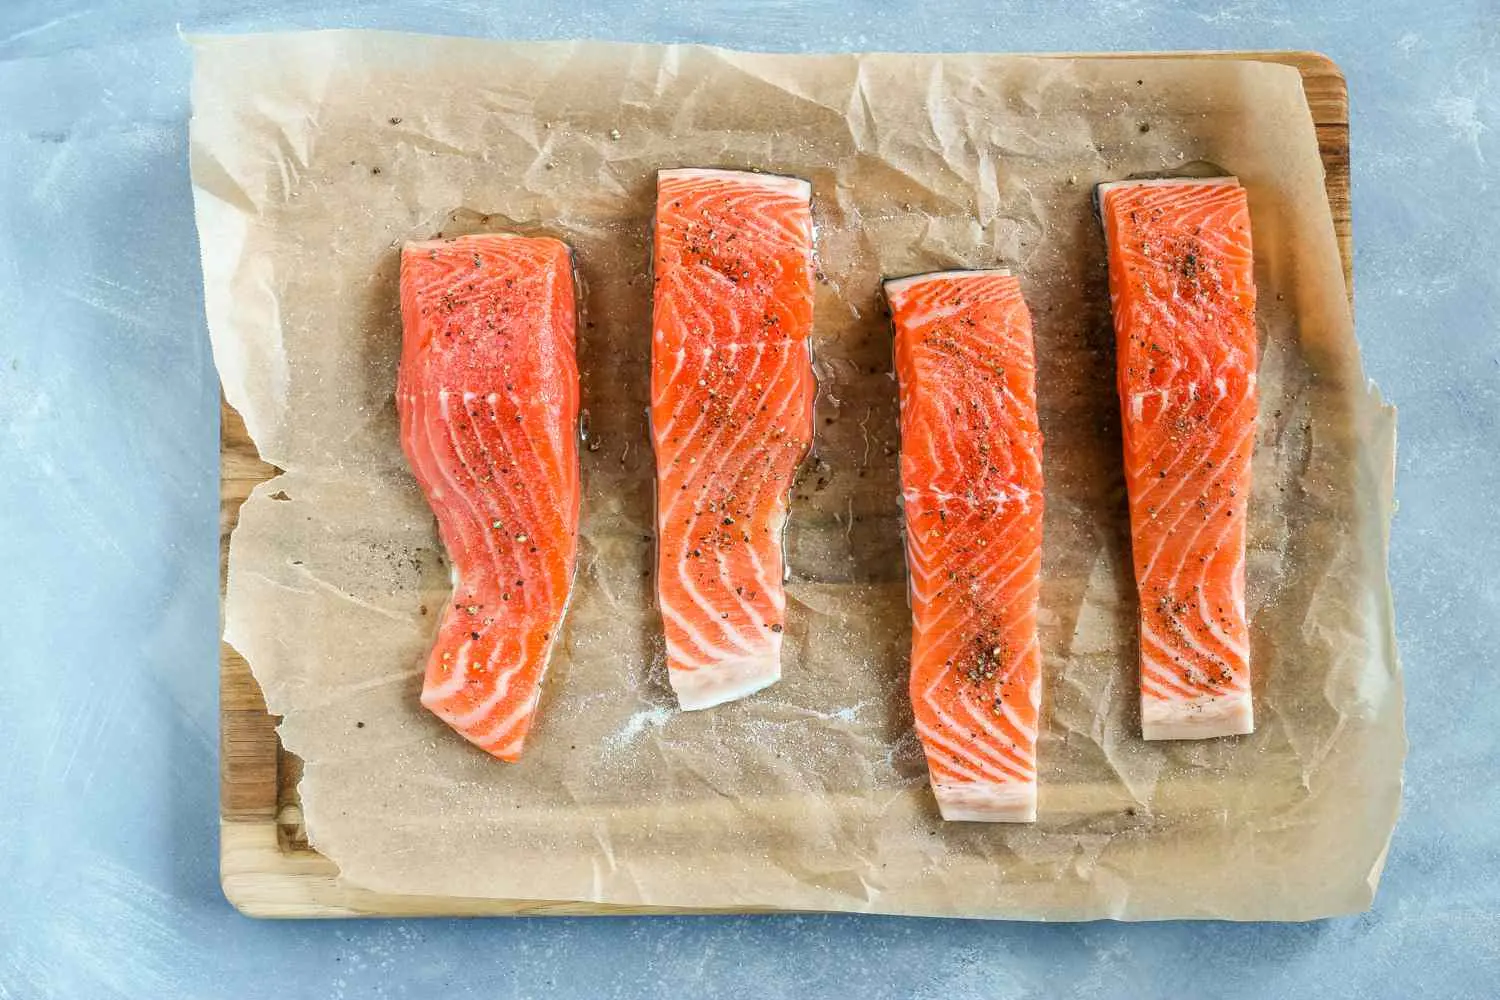 smoked salmon intolerance - Can you suddenly become intolerant to salmon